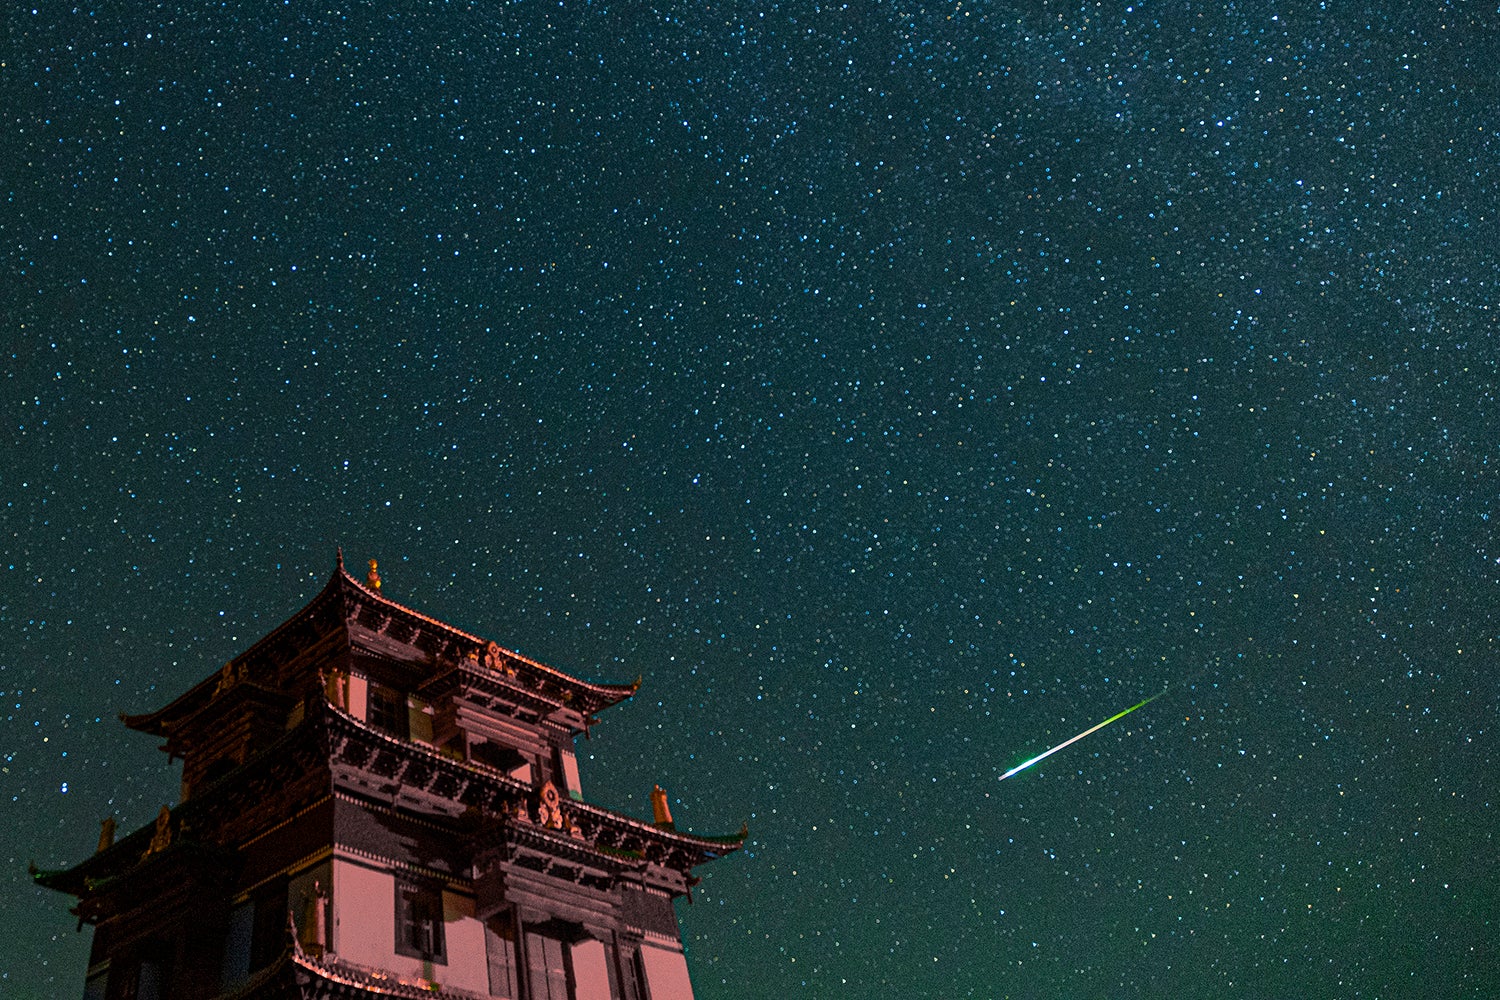 GOLOG, CHINA - AUGUST 13: A meteor streaks across the sky during the Perseid meteor shower on August 13, 2023 in Golog Tibetan Autonomous Prefecture, Qinghai Province of China. (Photo by VCG/VCG via Getty Images)